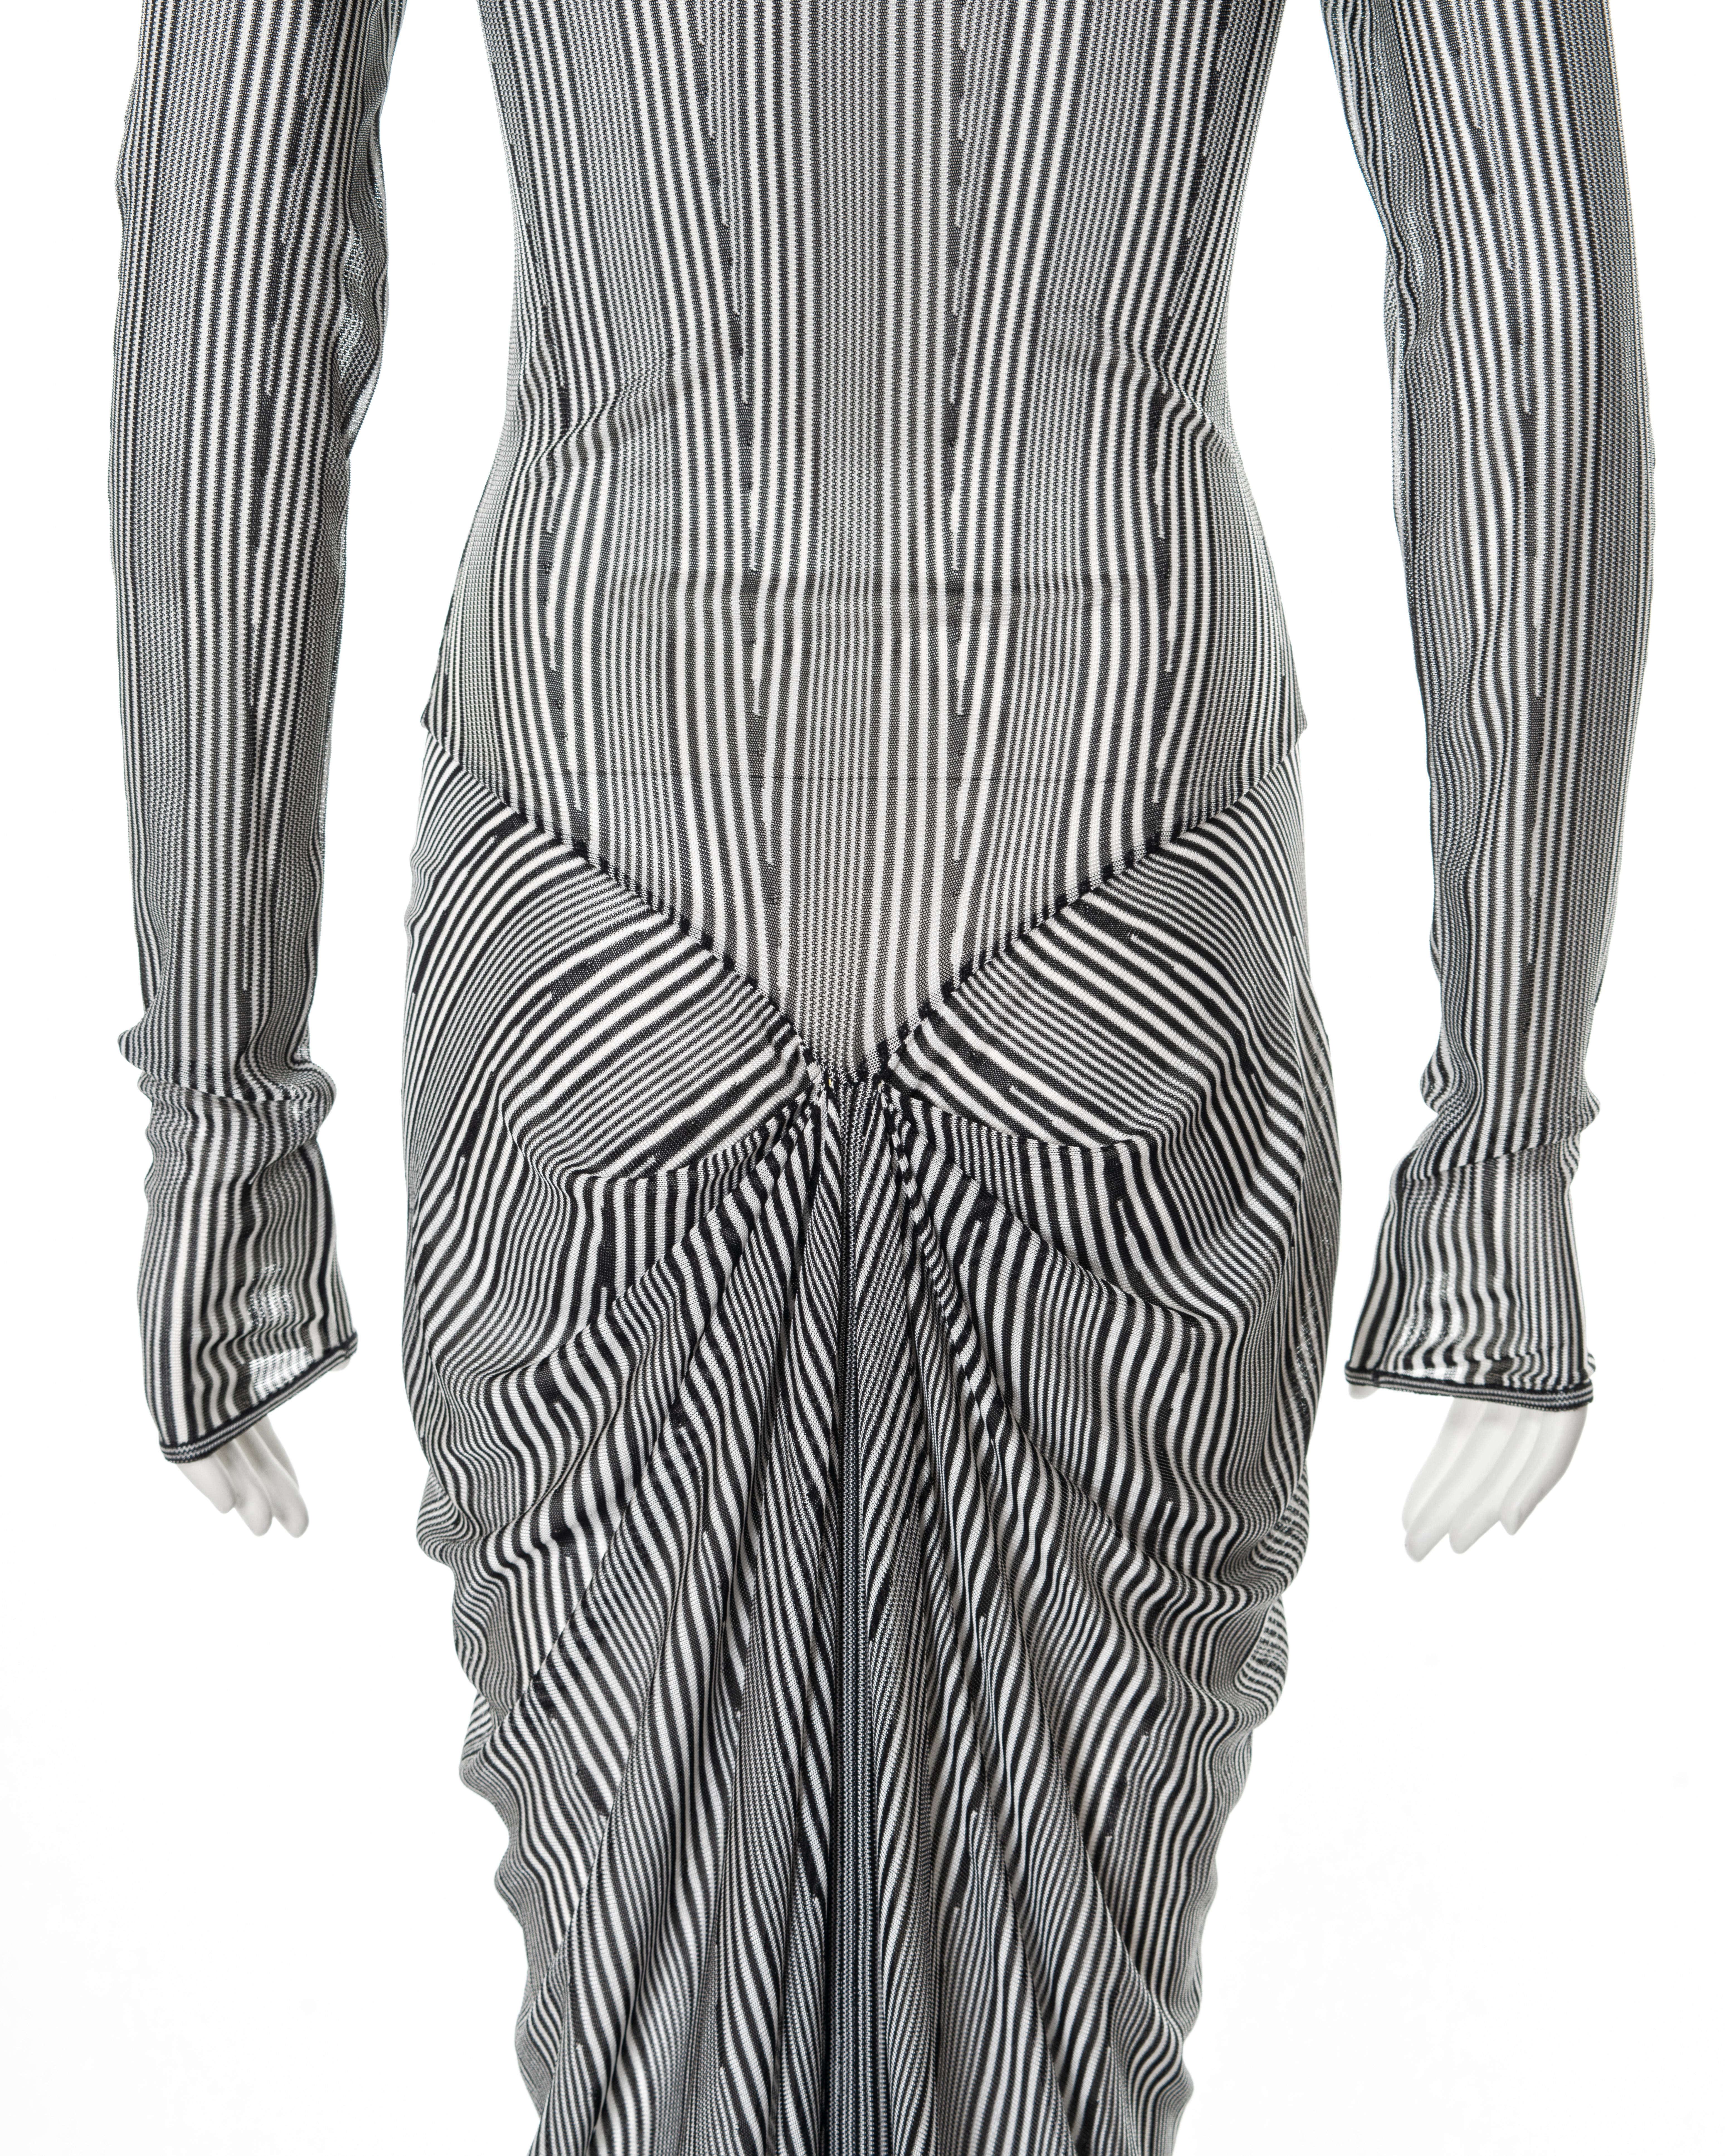 John Galliano black and white striped viscose knit hooded dress, ss 2002 For Sale 4